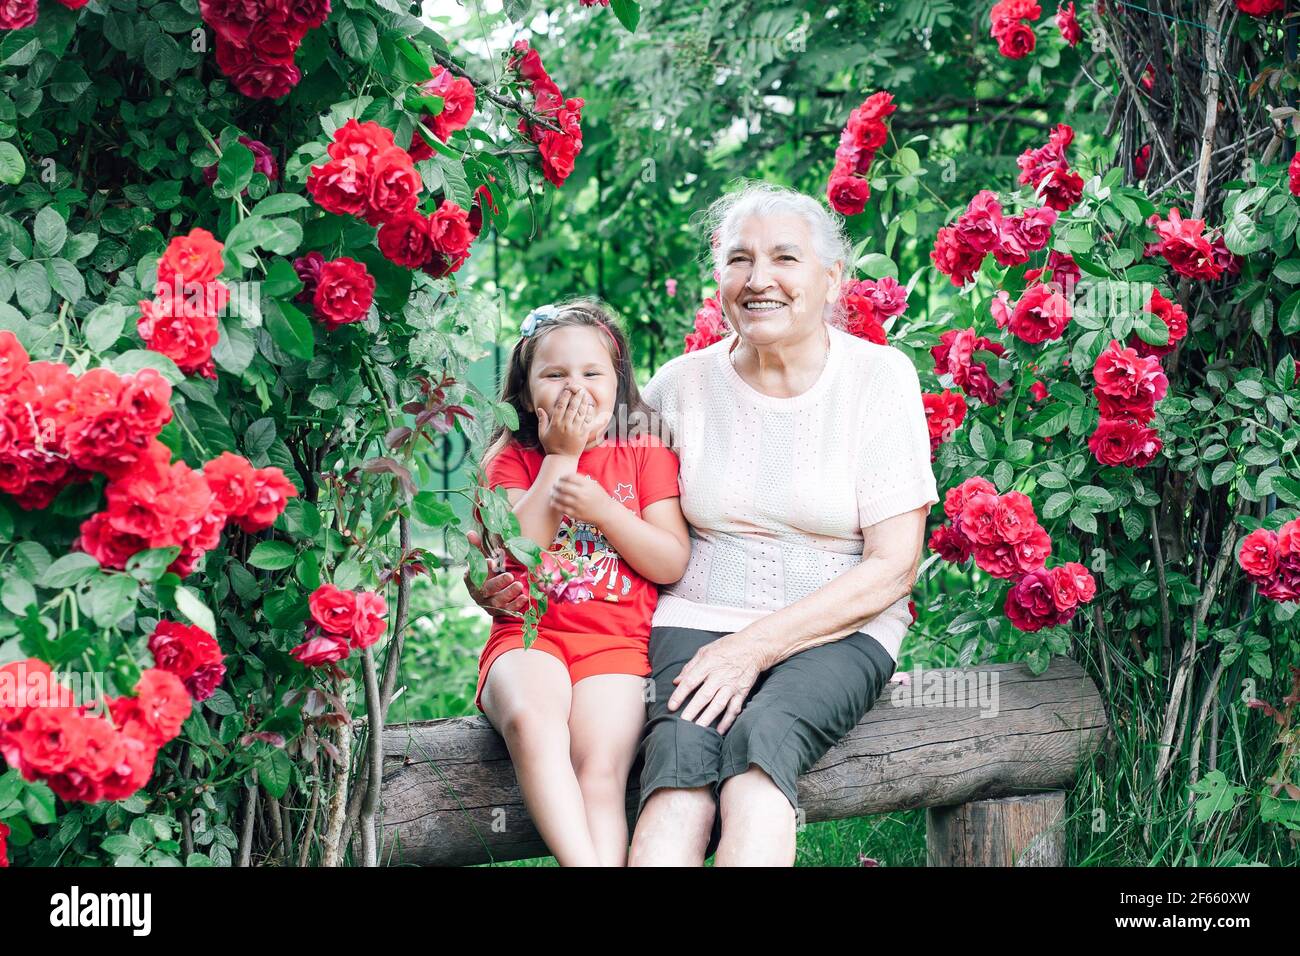 a white-haired old woman with a snow-white smile and a five-year-old girl are having fun sitting on a bench in the courtyard with rose bushes Stock Photo